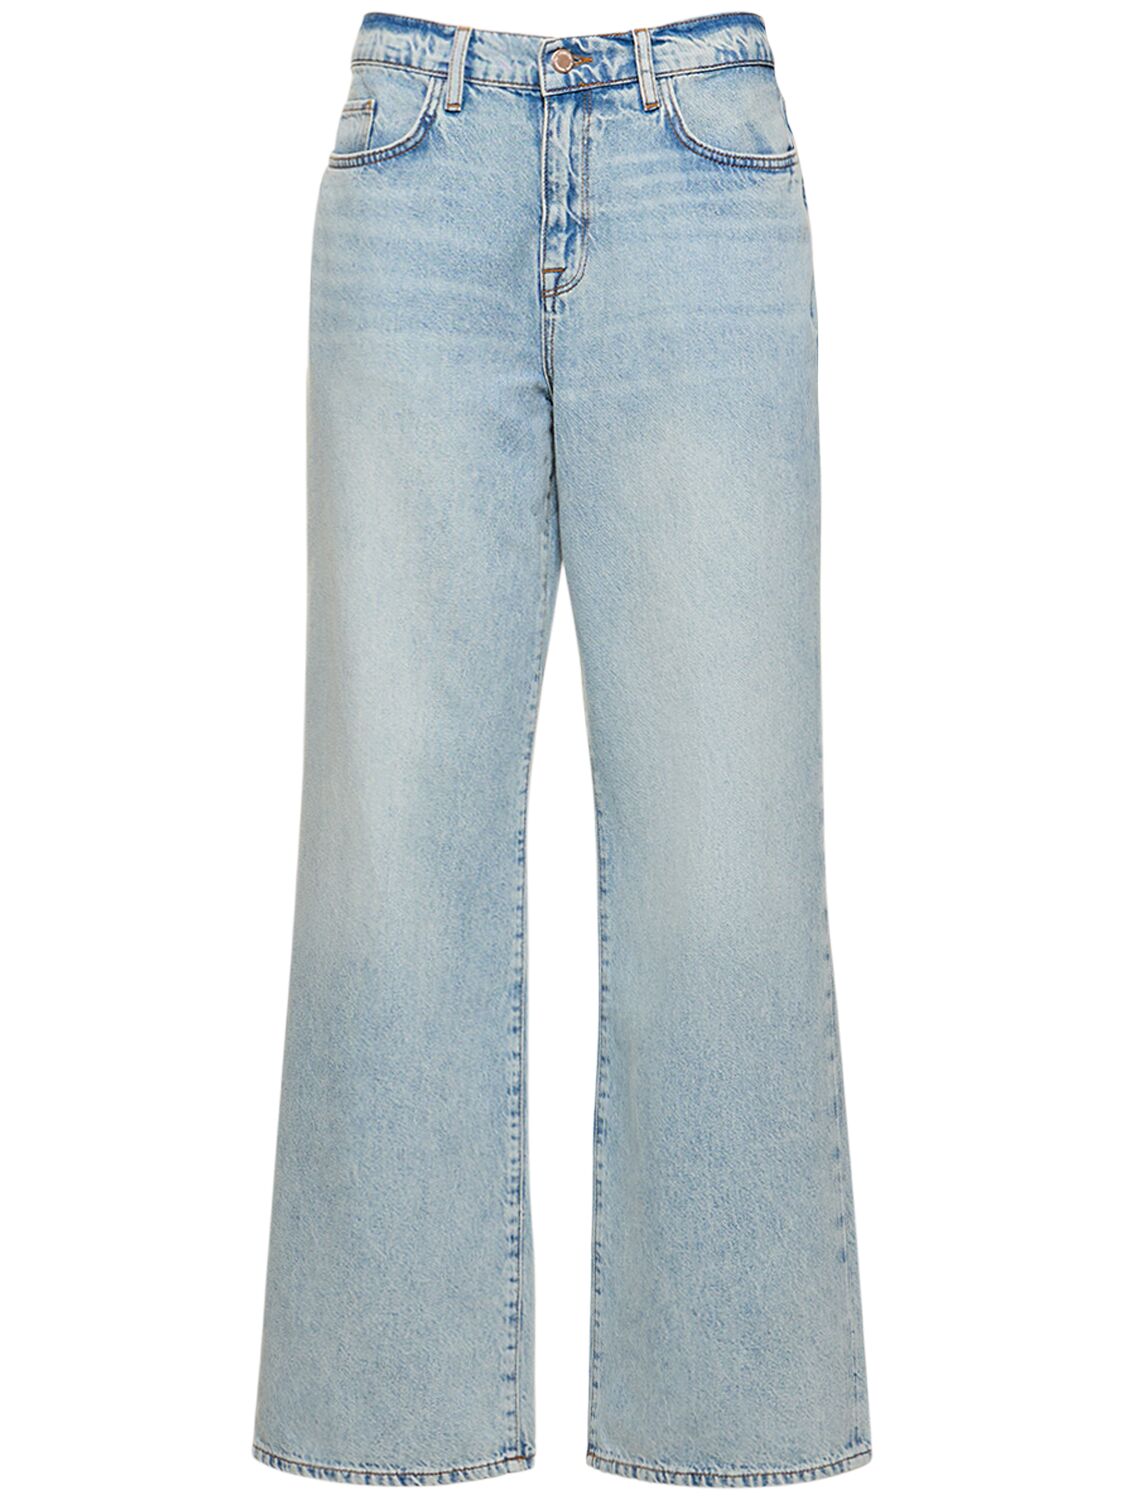 Image of Ms. Miley Mid-rise Baggy Cotton Jeans